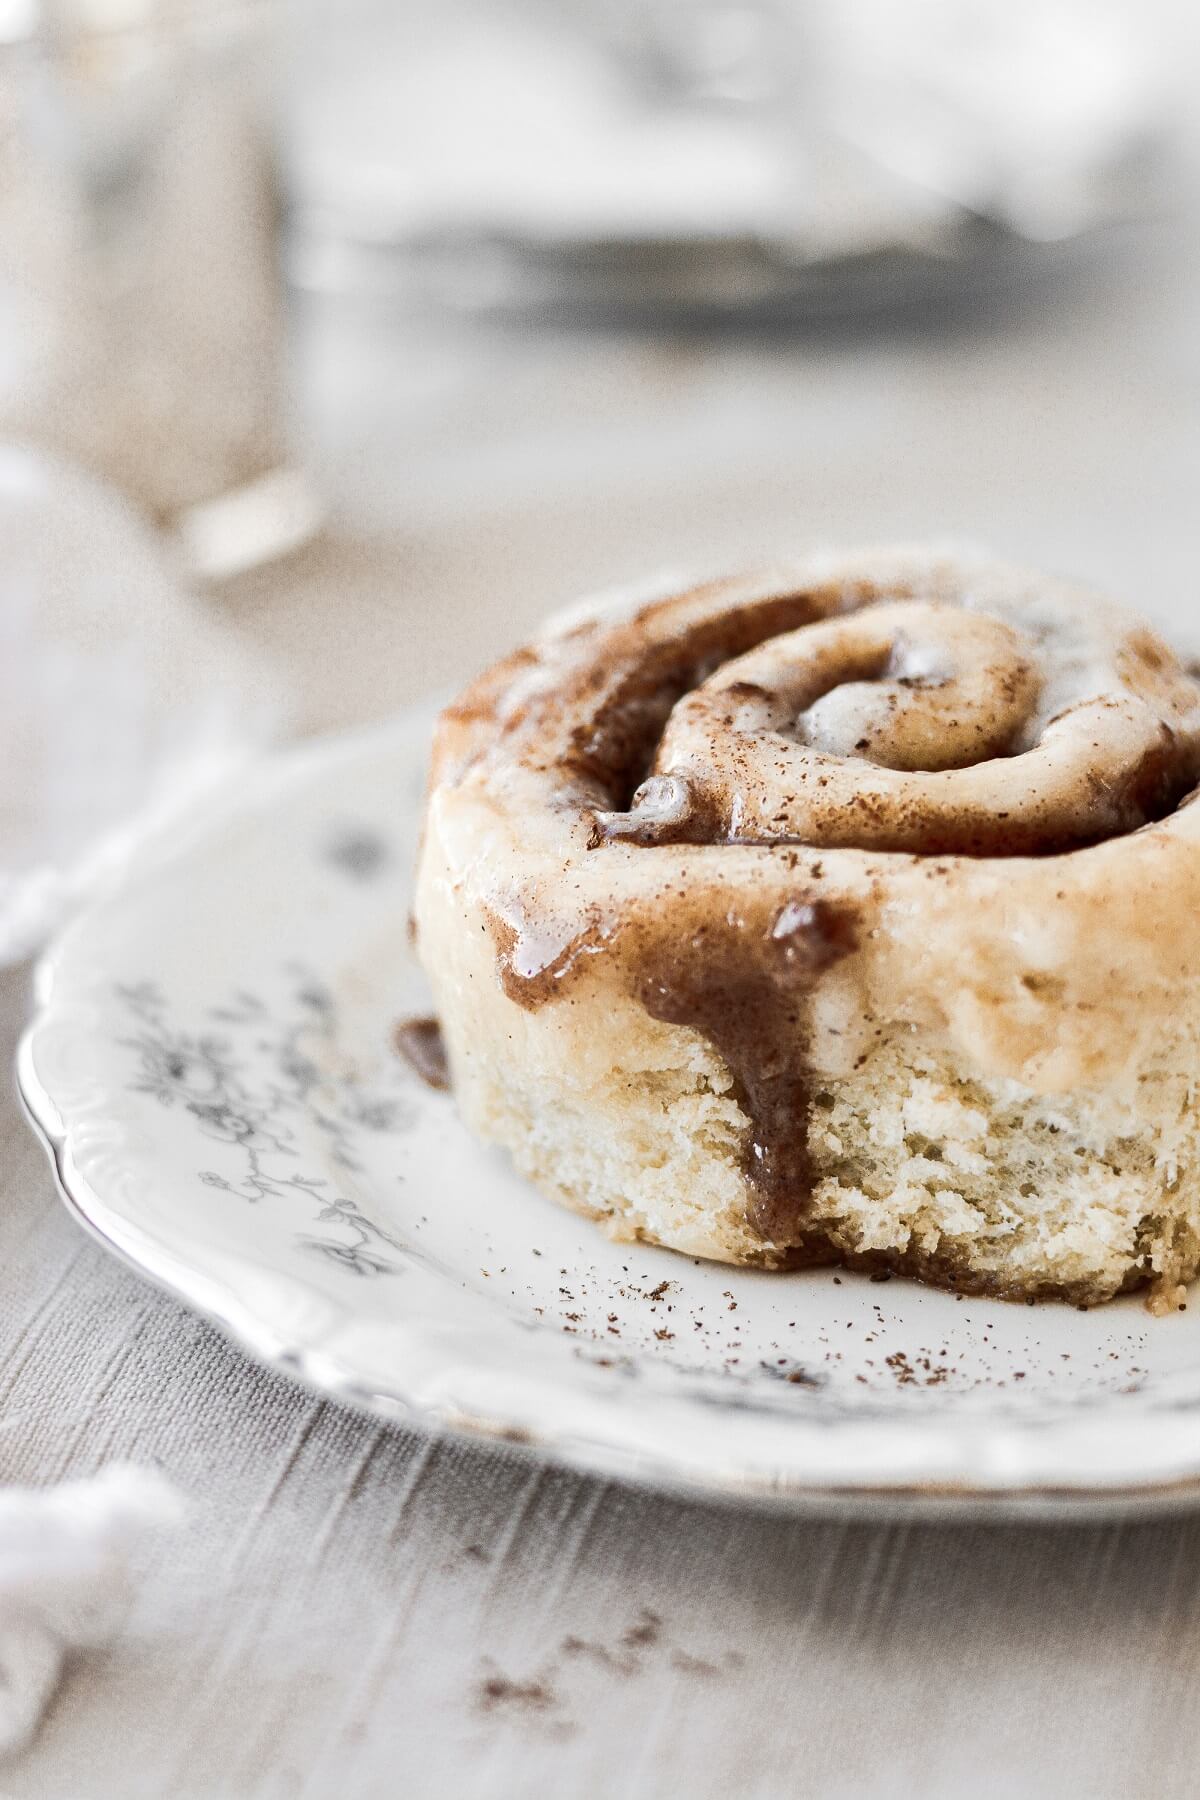 A cinnamon roll dripping with icing.